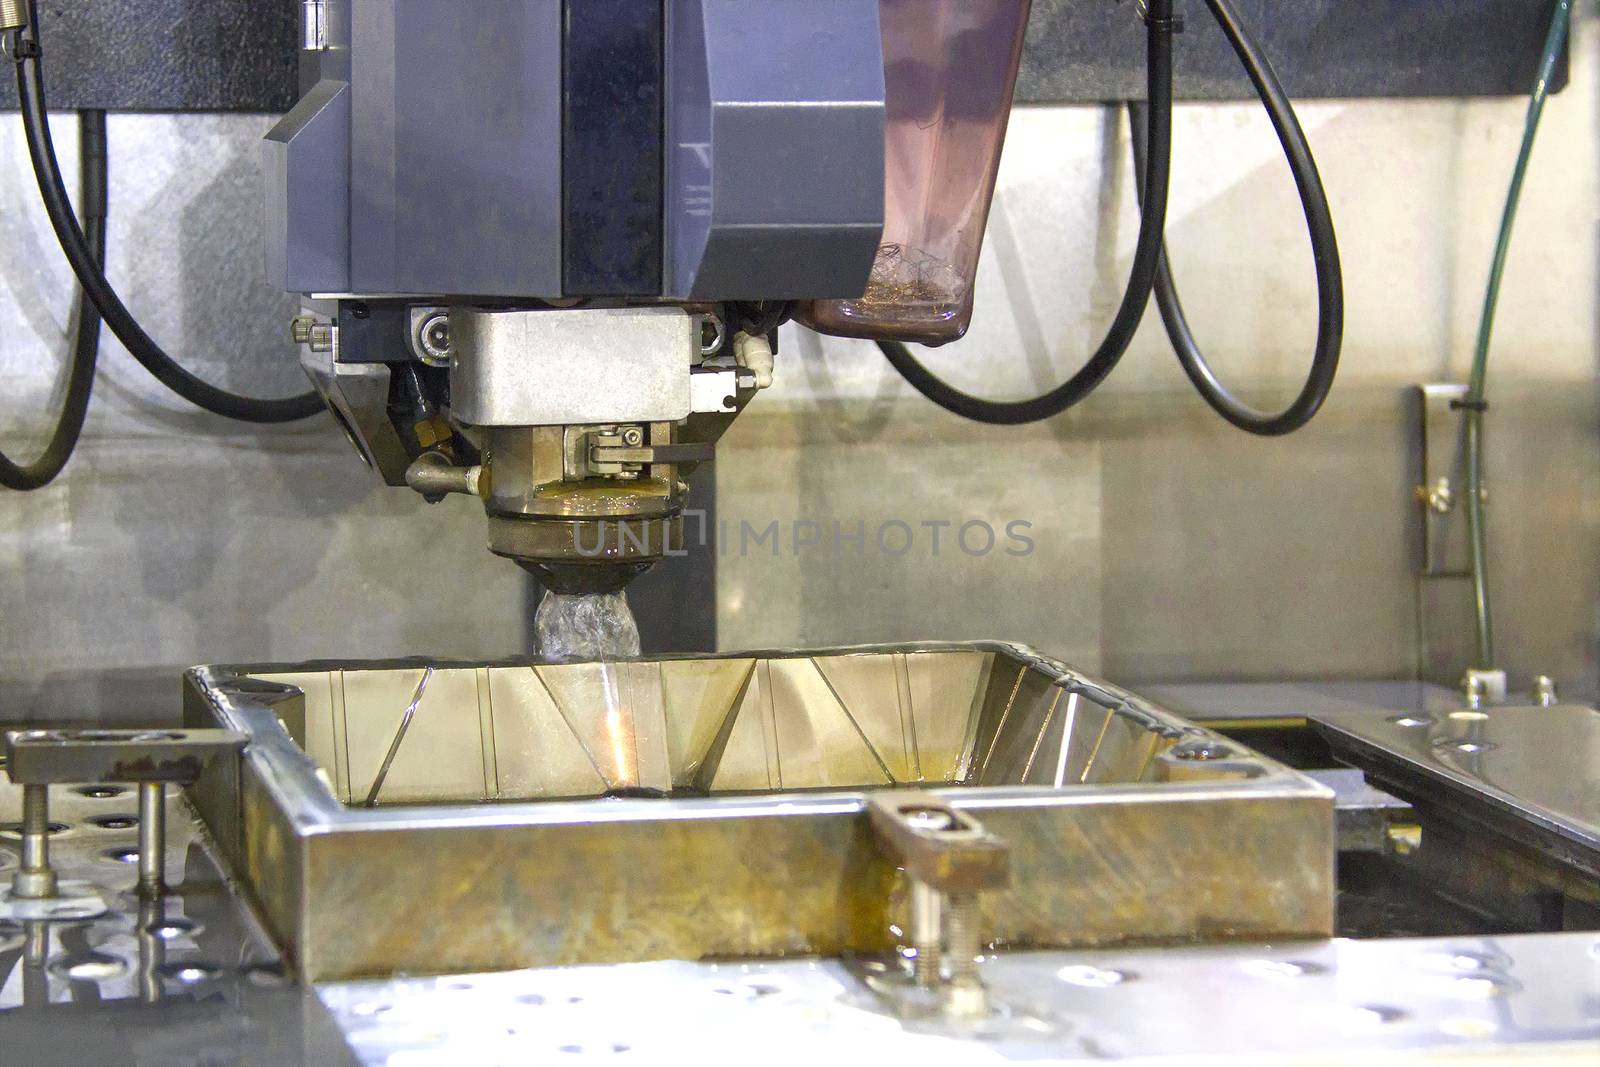 CNC wire cutter works in slender cutting of metal. by TakerWalker